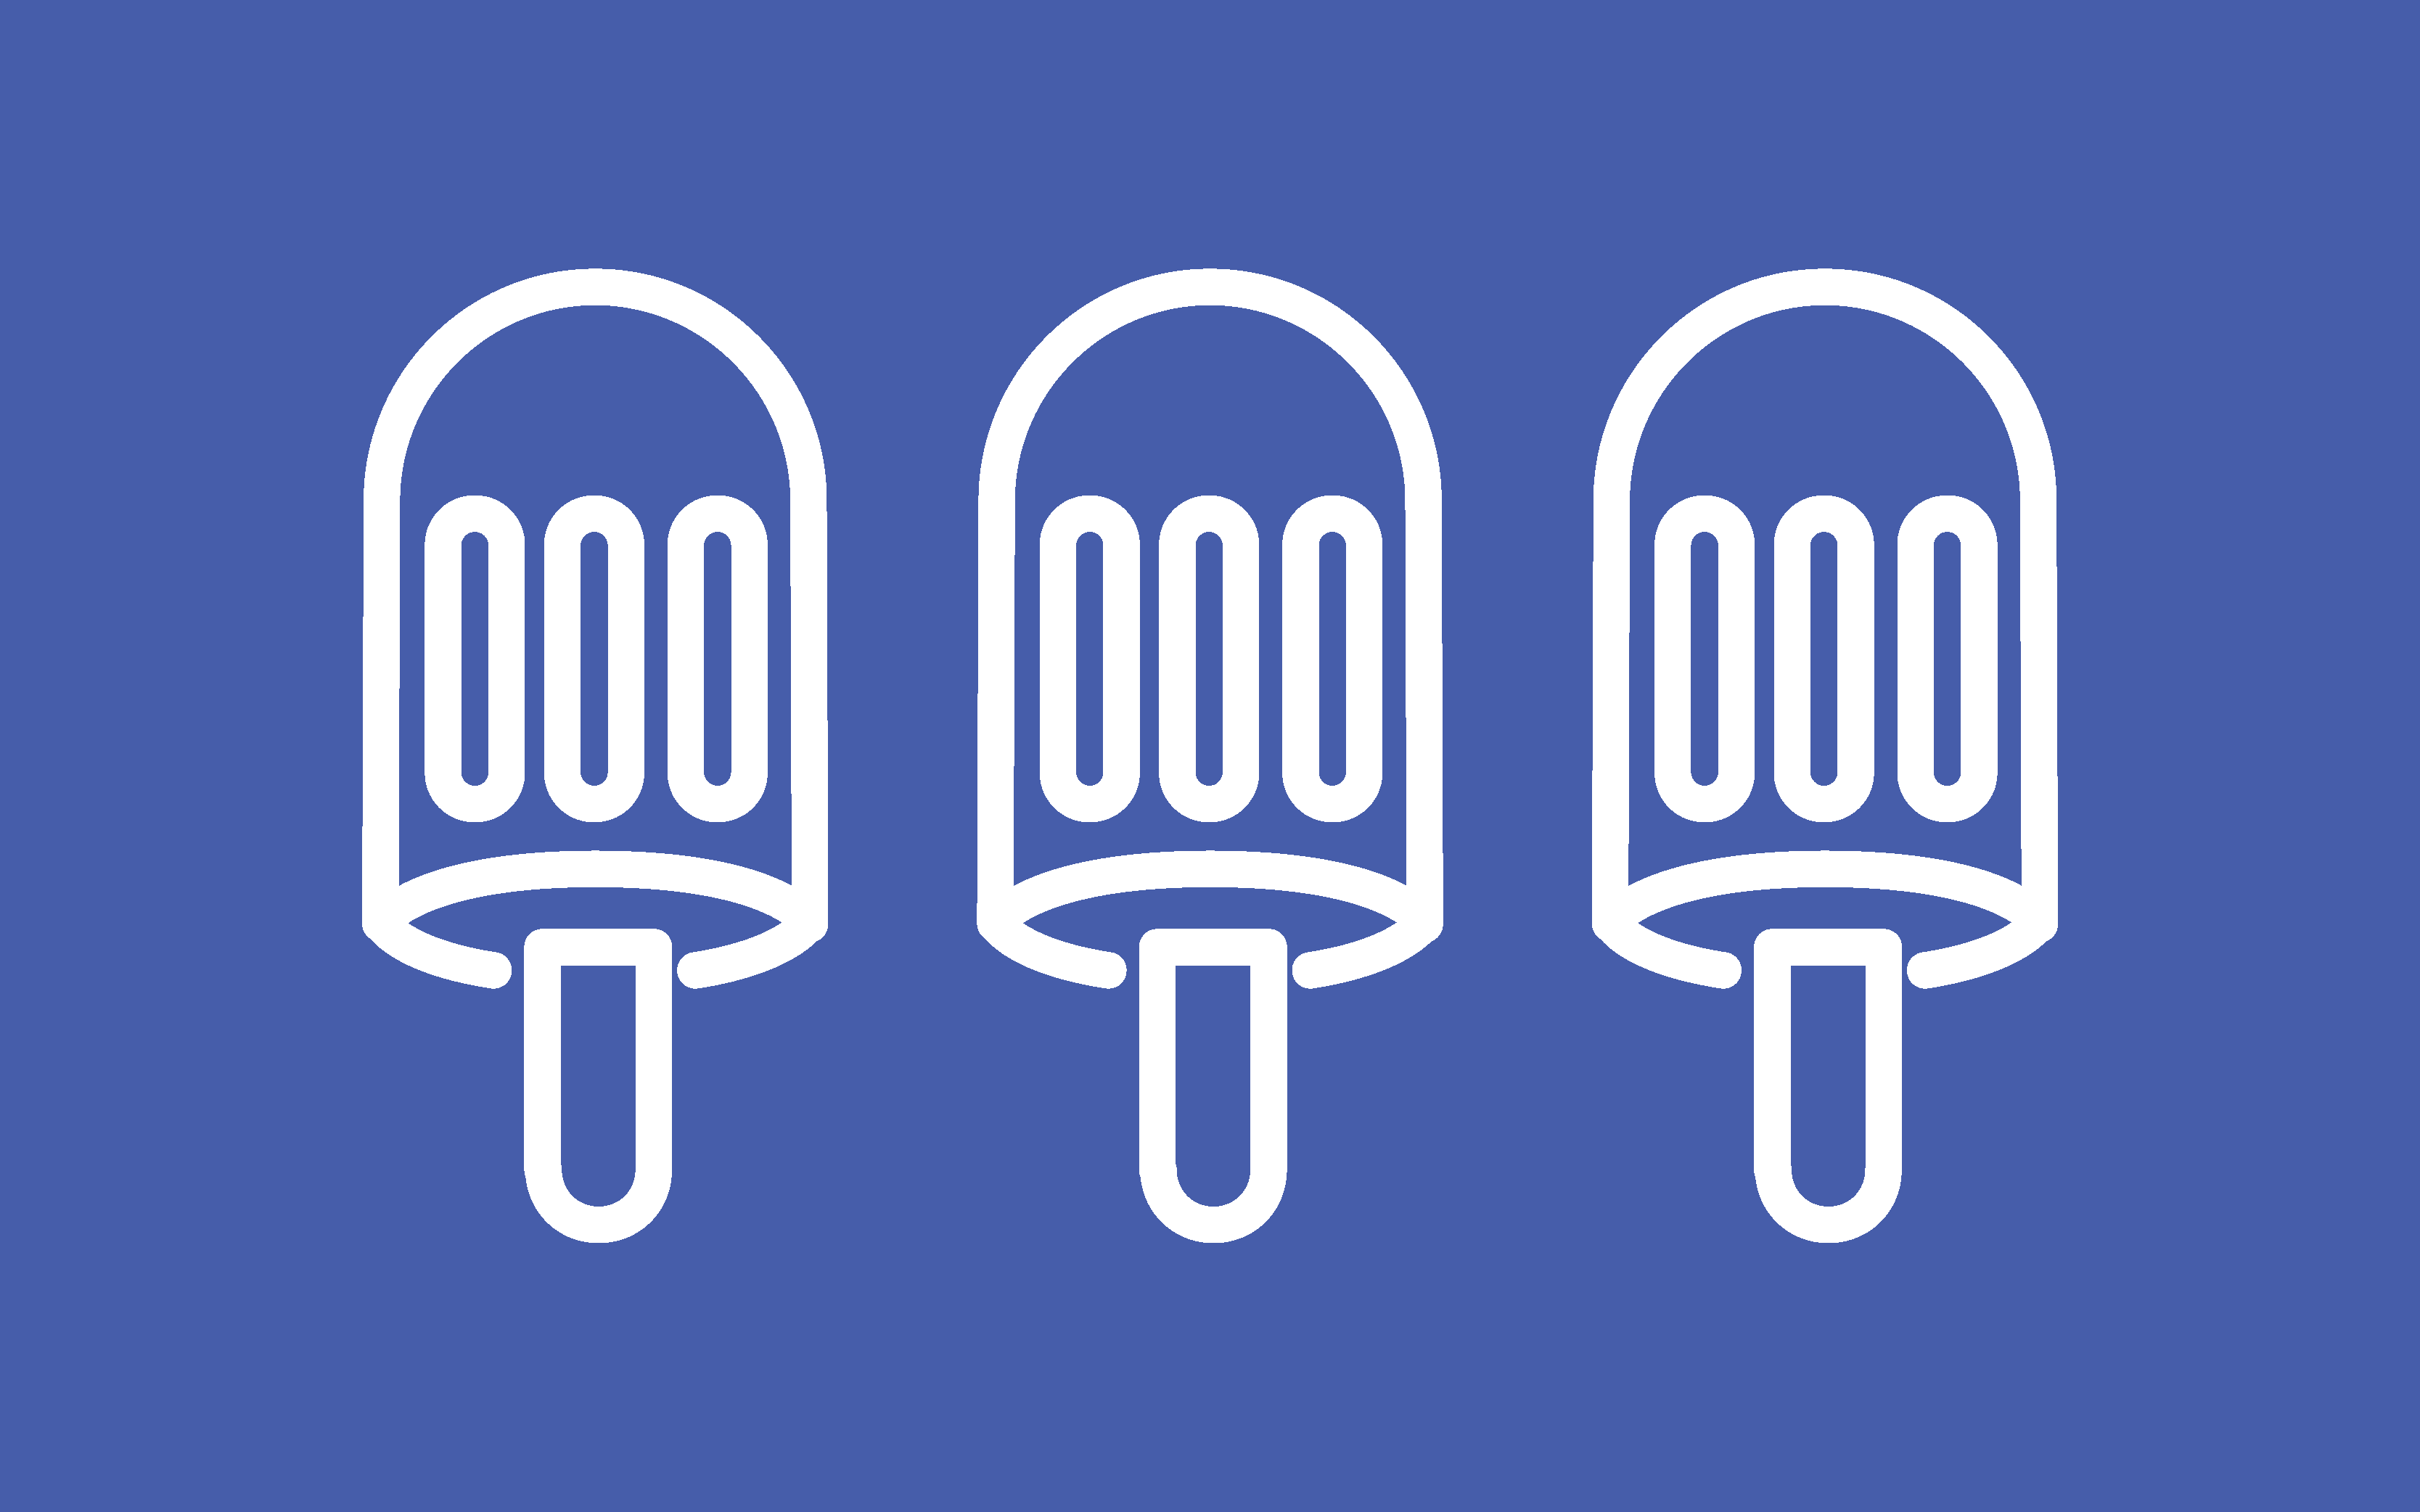 Illustration of 3 popsicles on a blue background